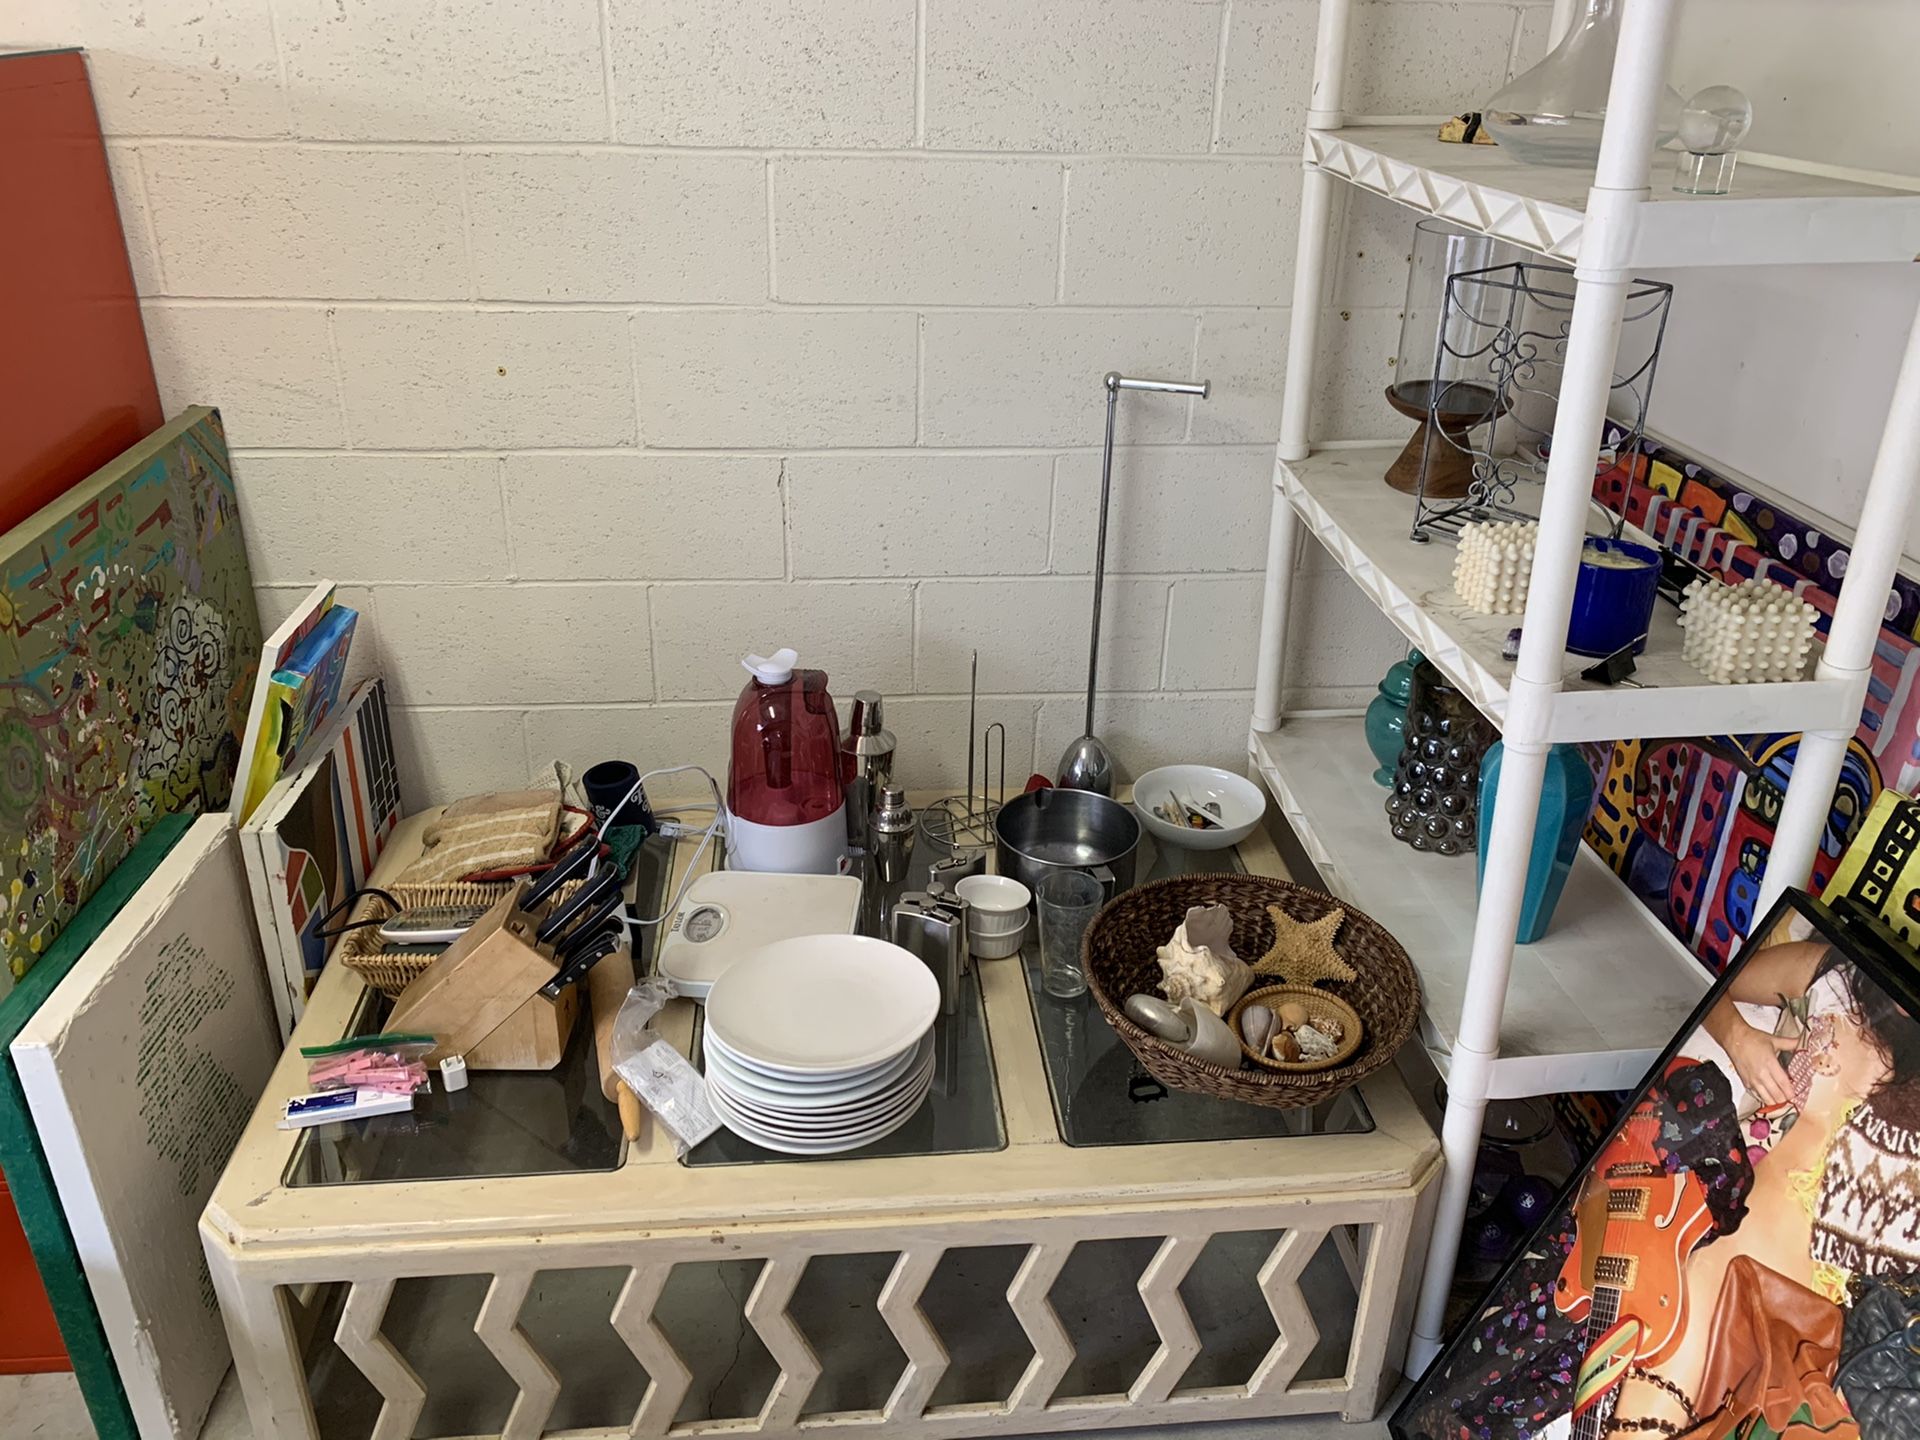 Kitchen Items etc - take all for $20